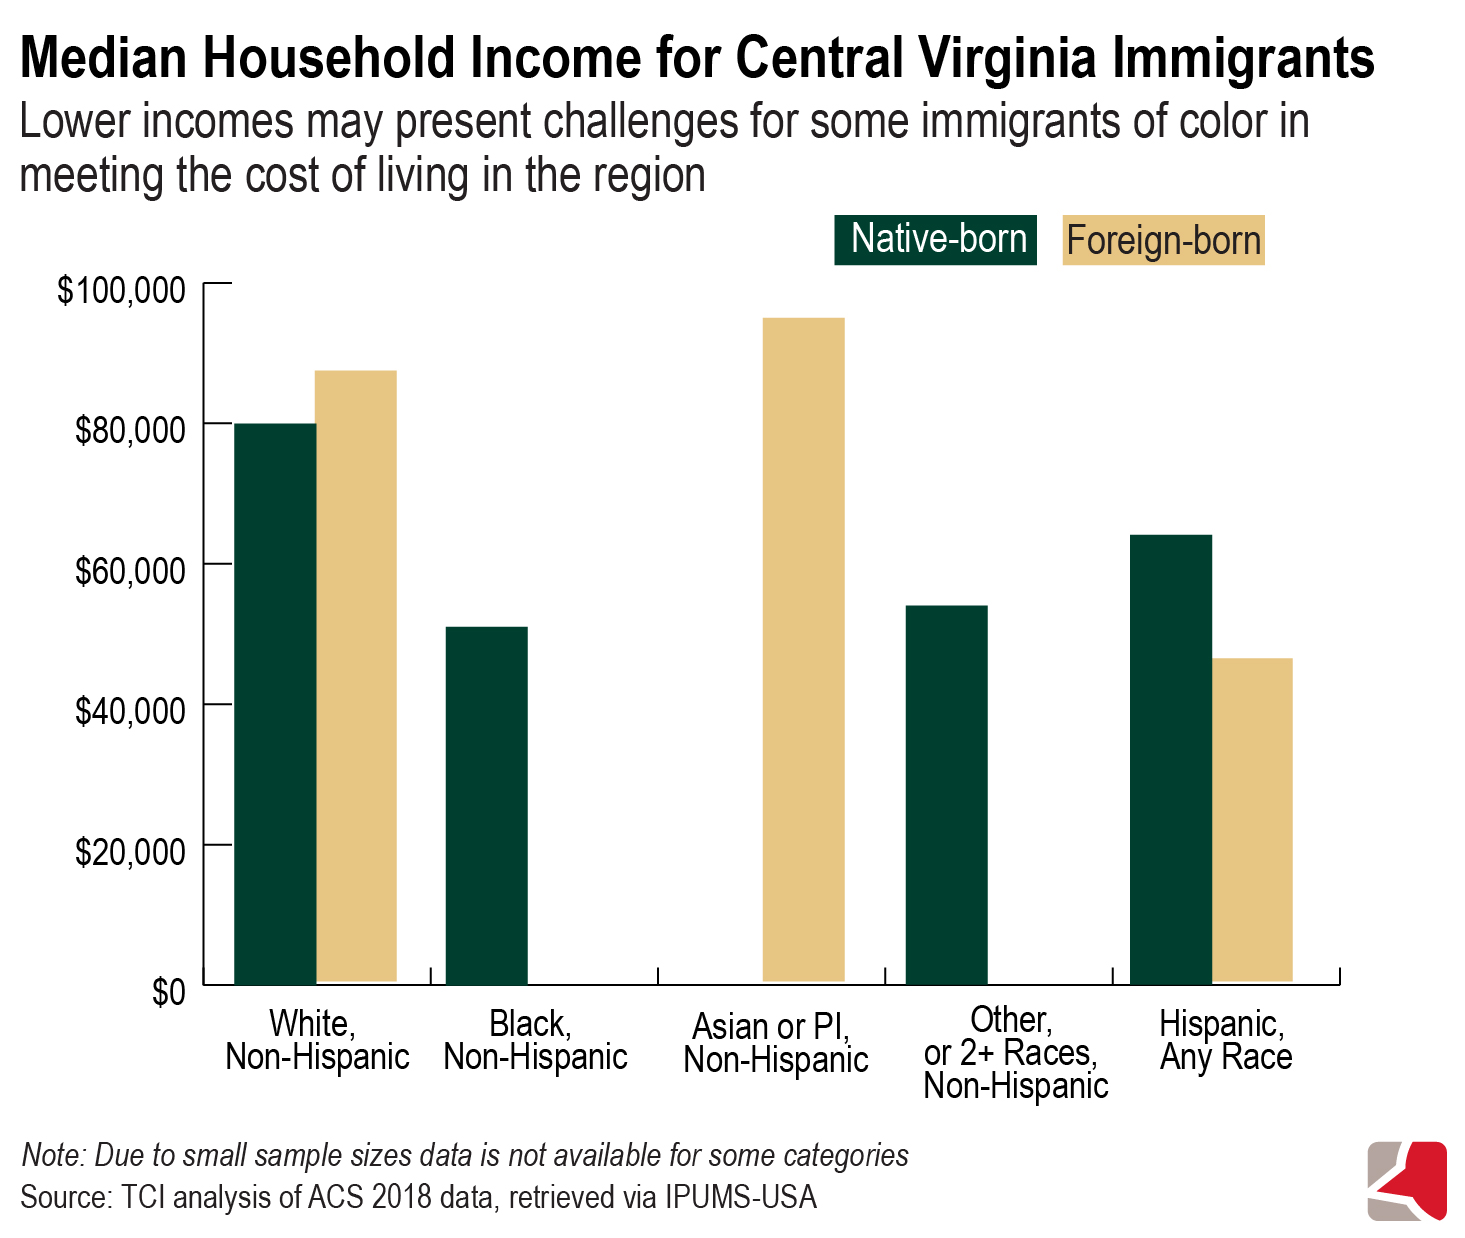 Bar graph showing median household income for central Virginia immigrants compared to native-born Virginians by race and ethnicity, based on analysis of ACS 2018 data via IPUMS-USA